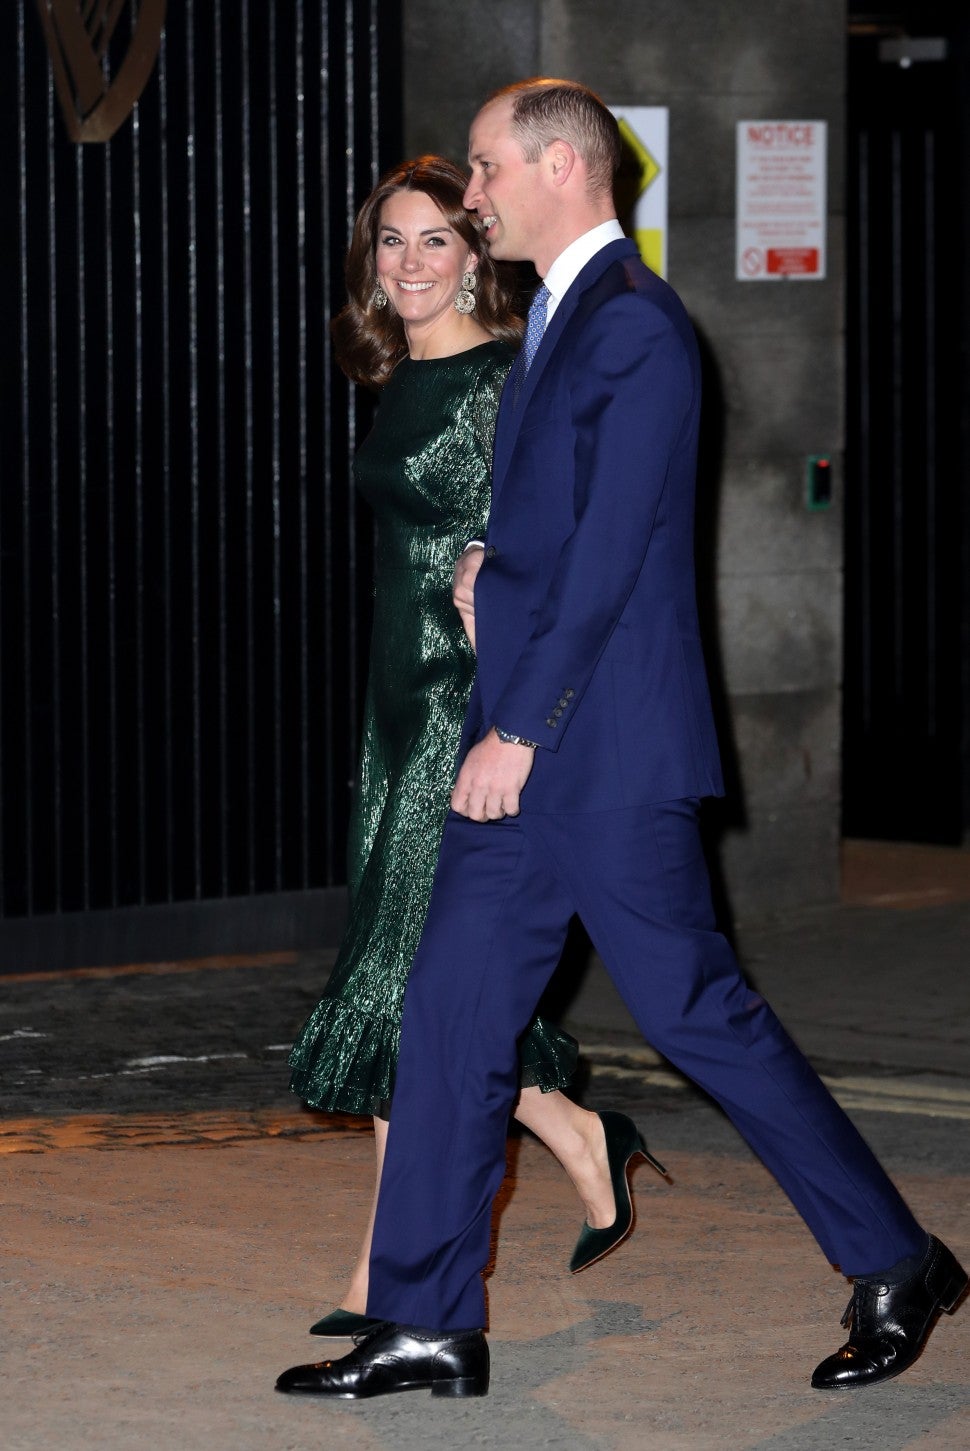 Kate Middleton Shows Some PDA With Prince William as She Dazzles in Ireland